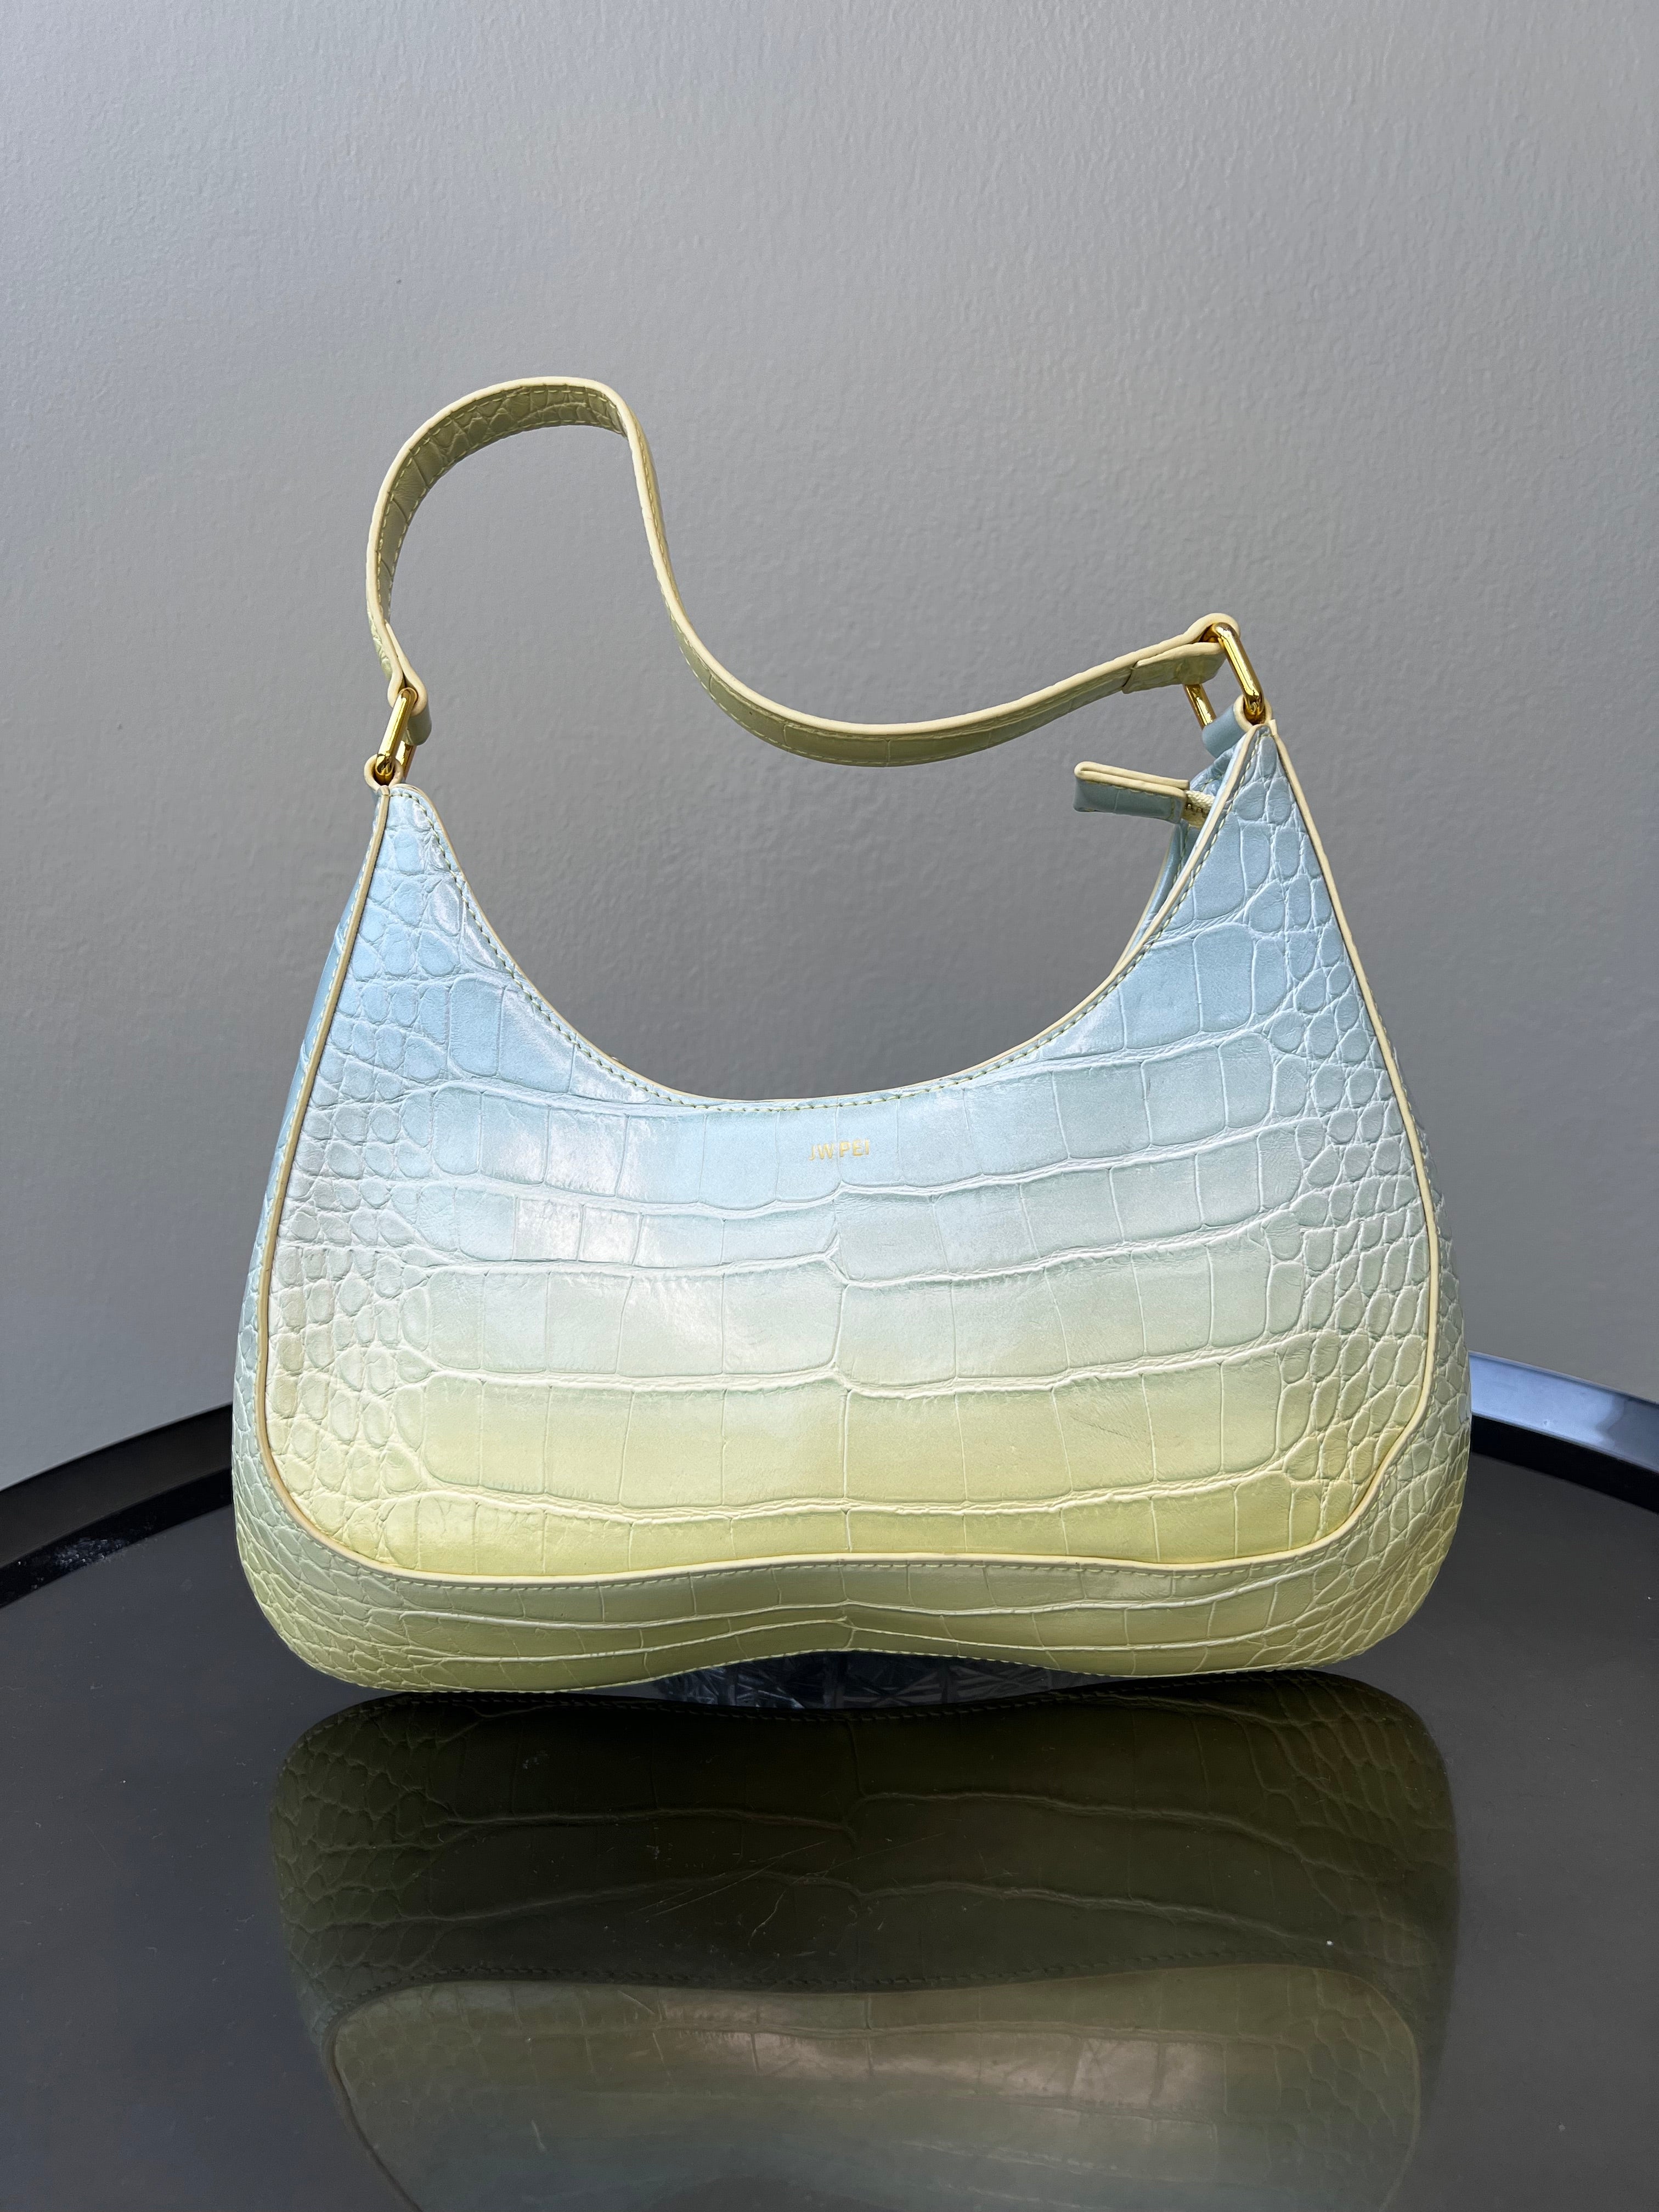 Ruby shoulder bag light yellow and blue gradient - JW PEI